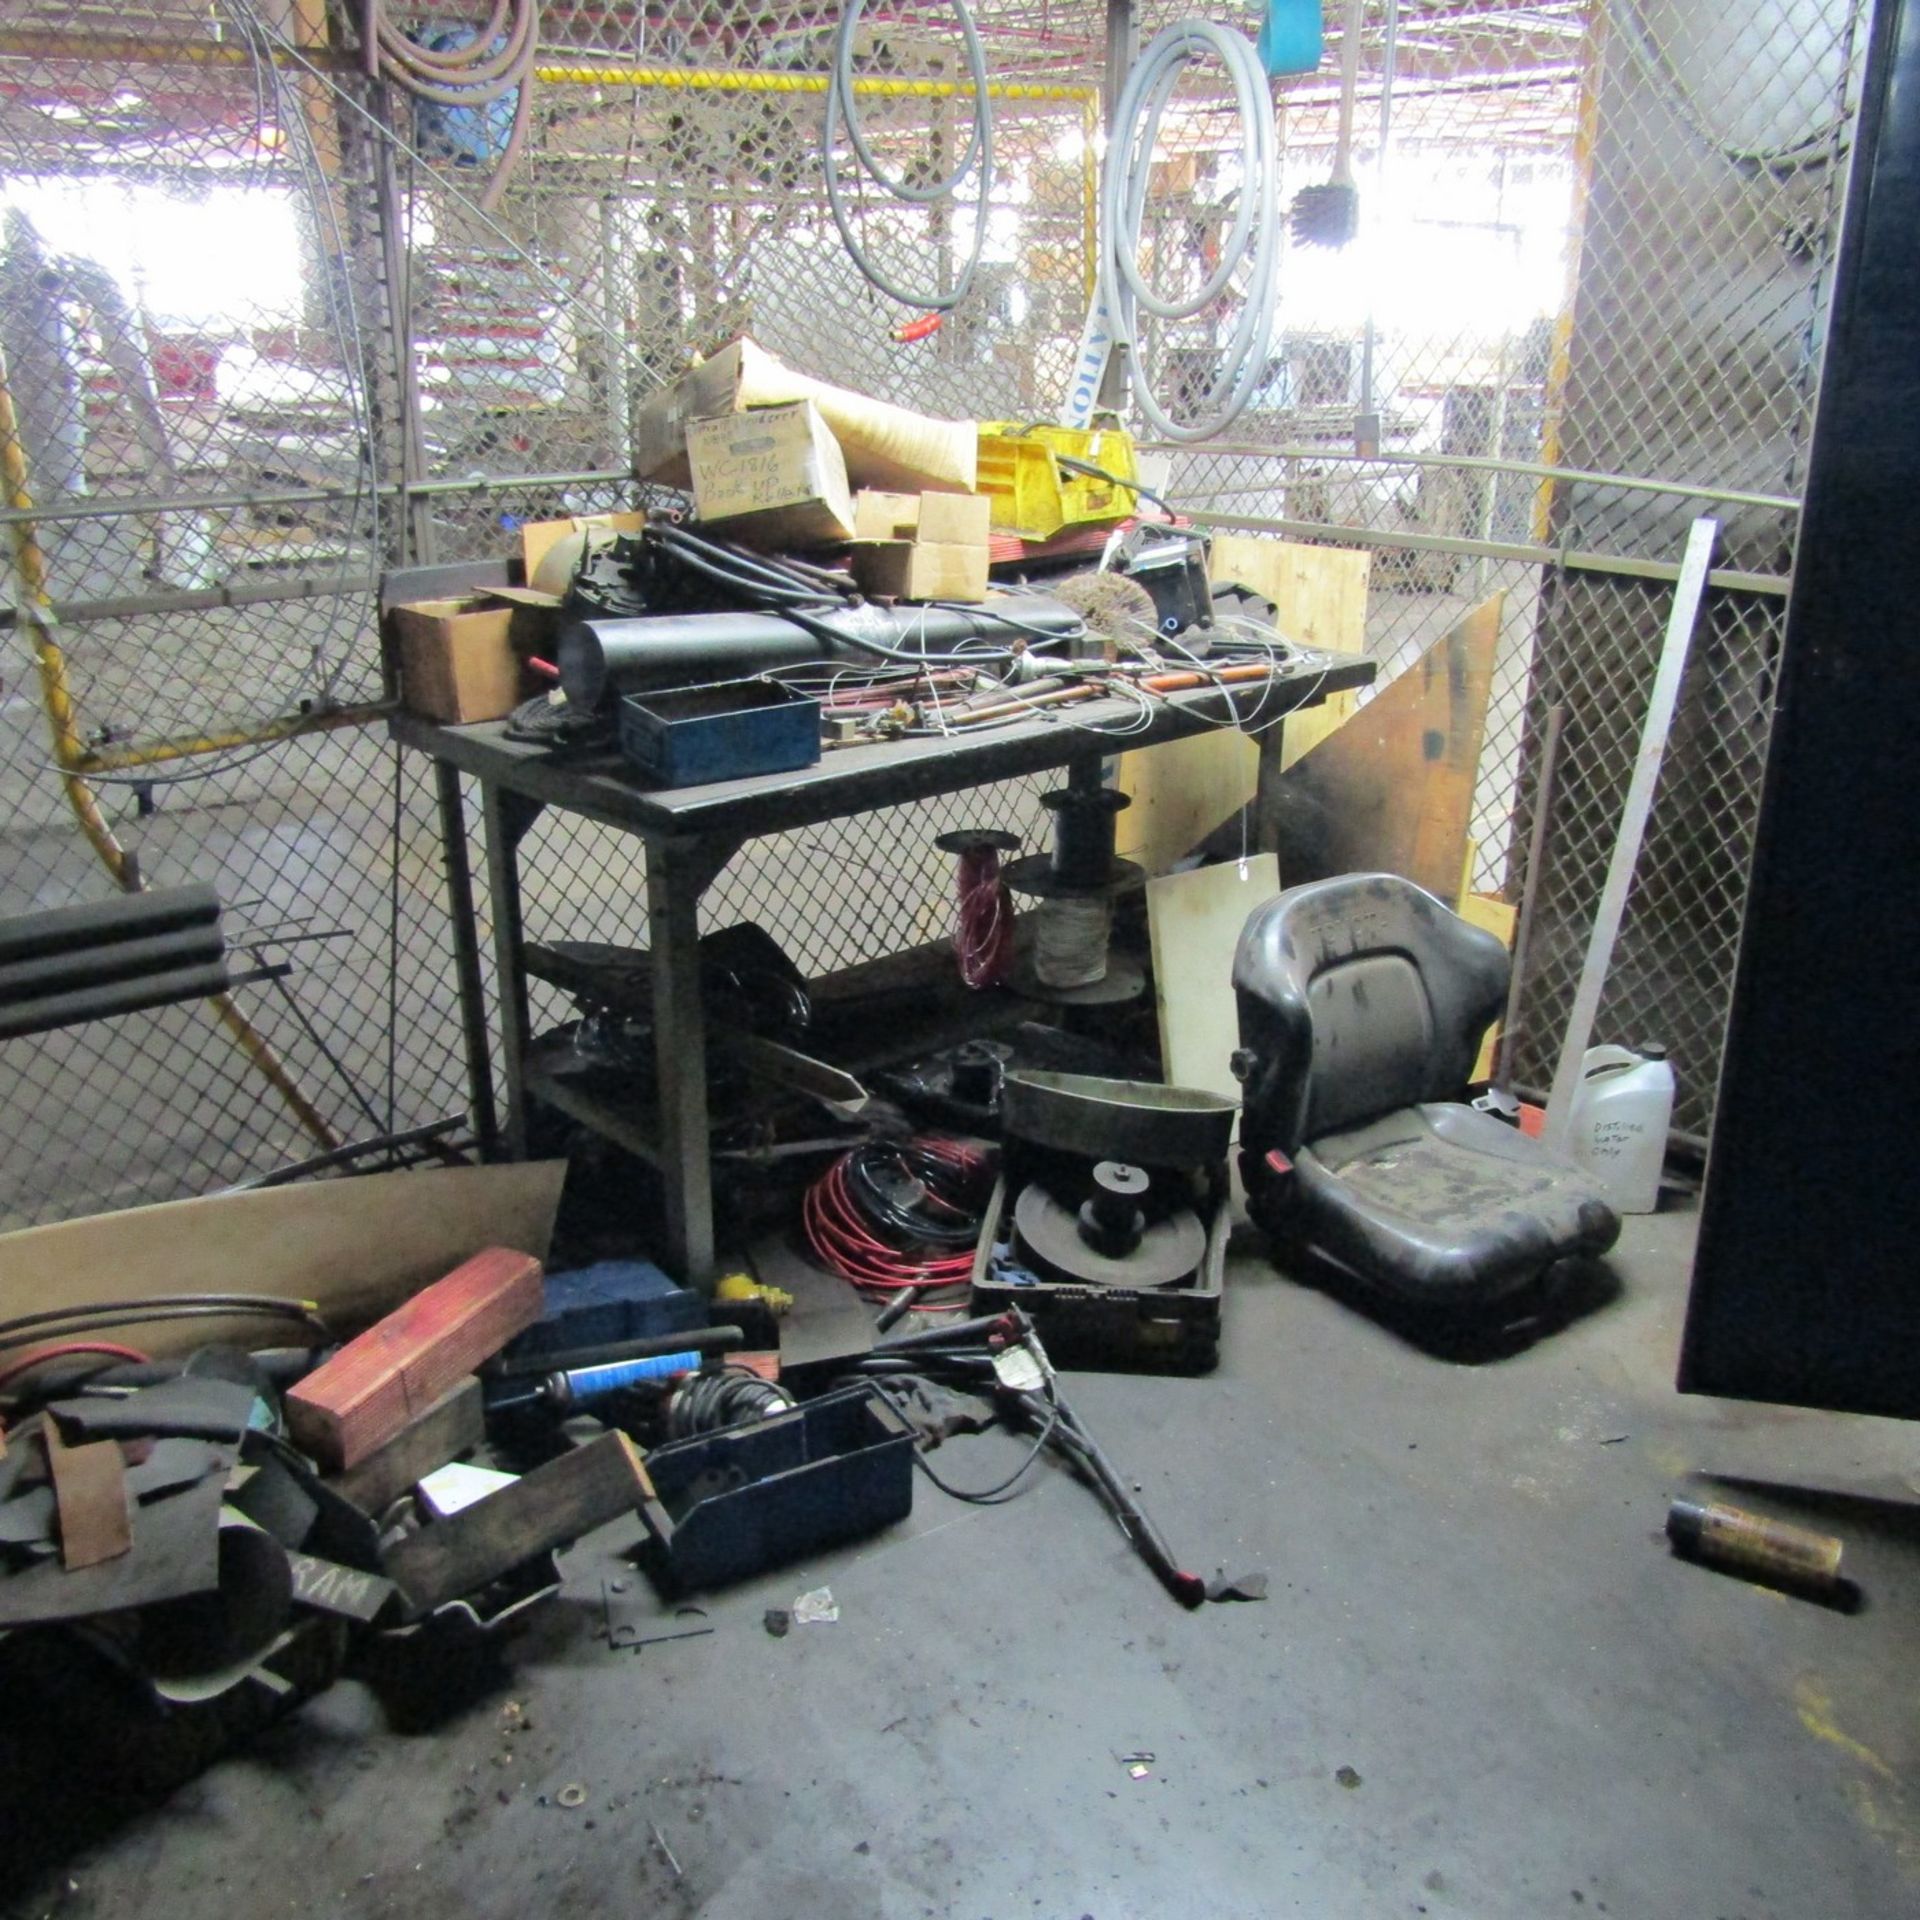 Lot - Tool Crib Fence with Contents to Include: Shelving Units, Cabinet, Belts, Hoses, Etc - Image 7 of 7